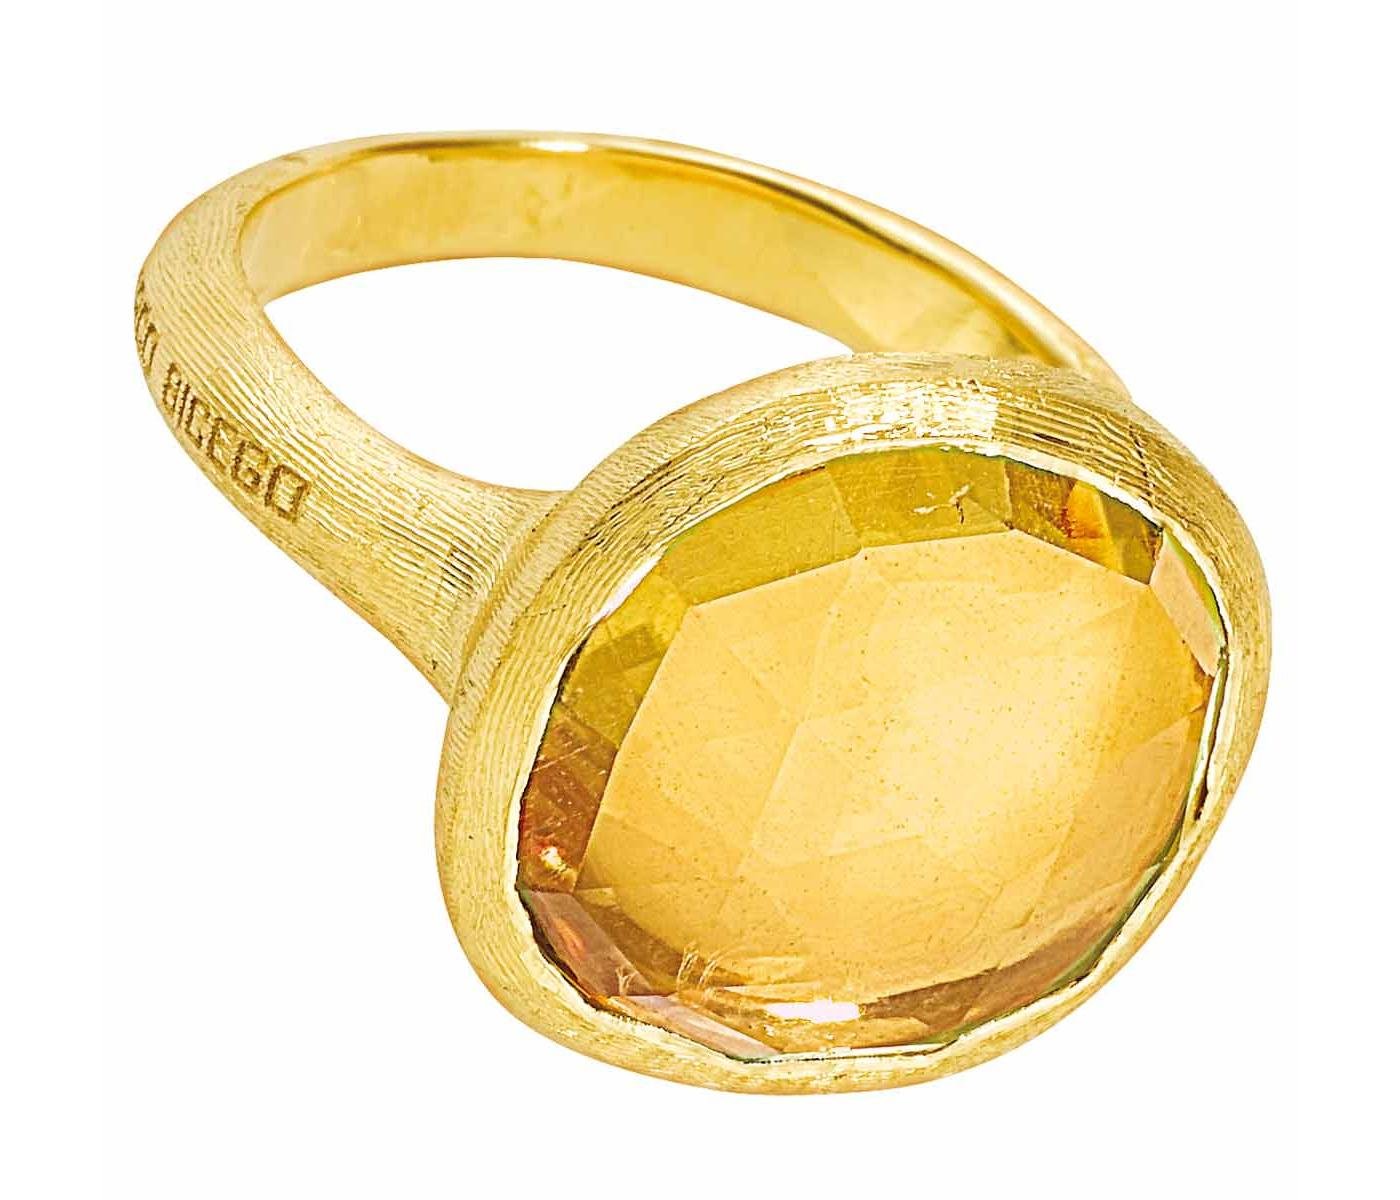 Ring by Marco Bicego